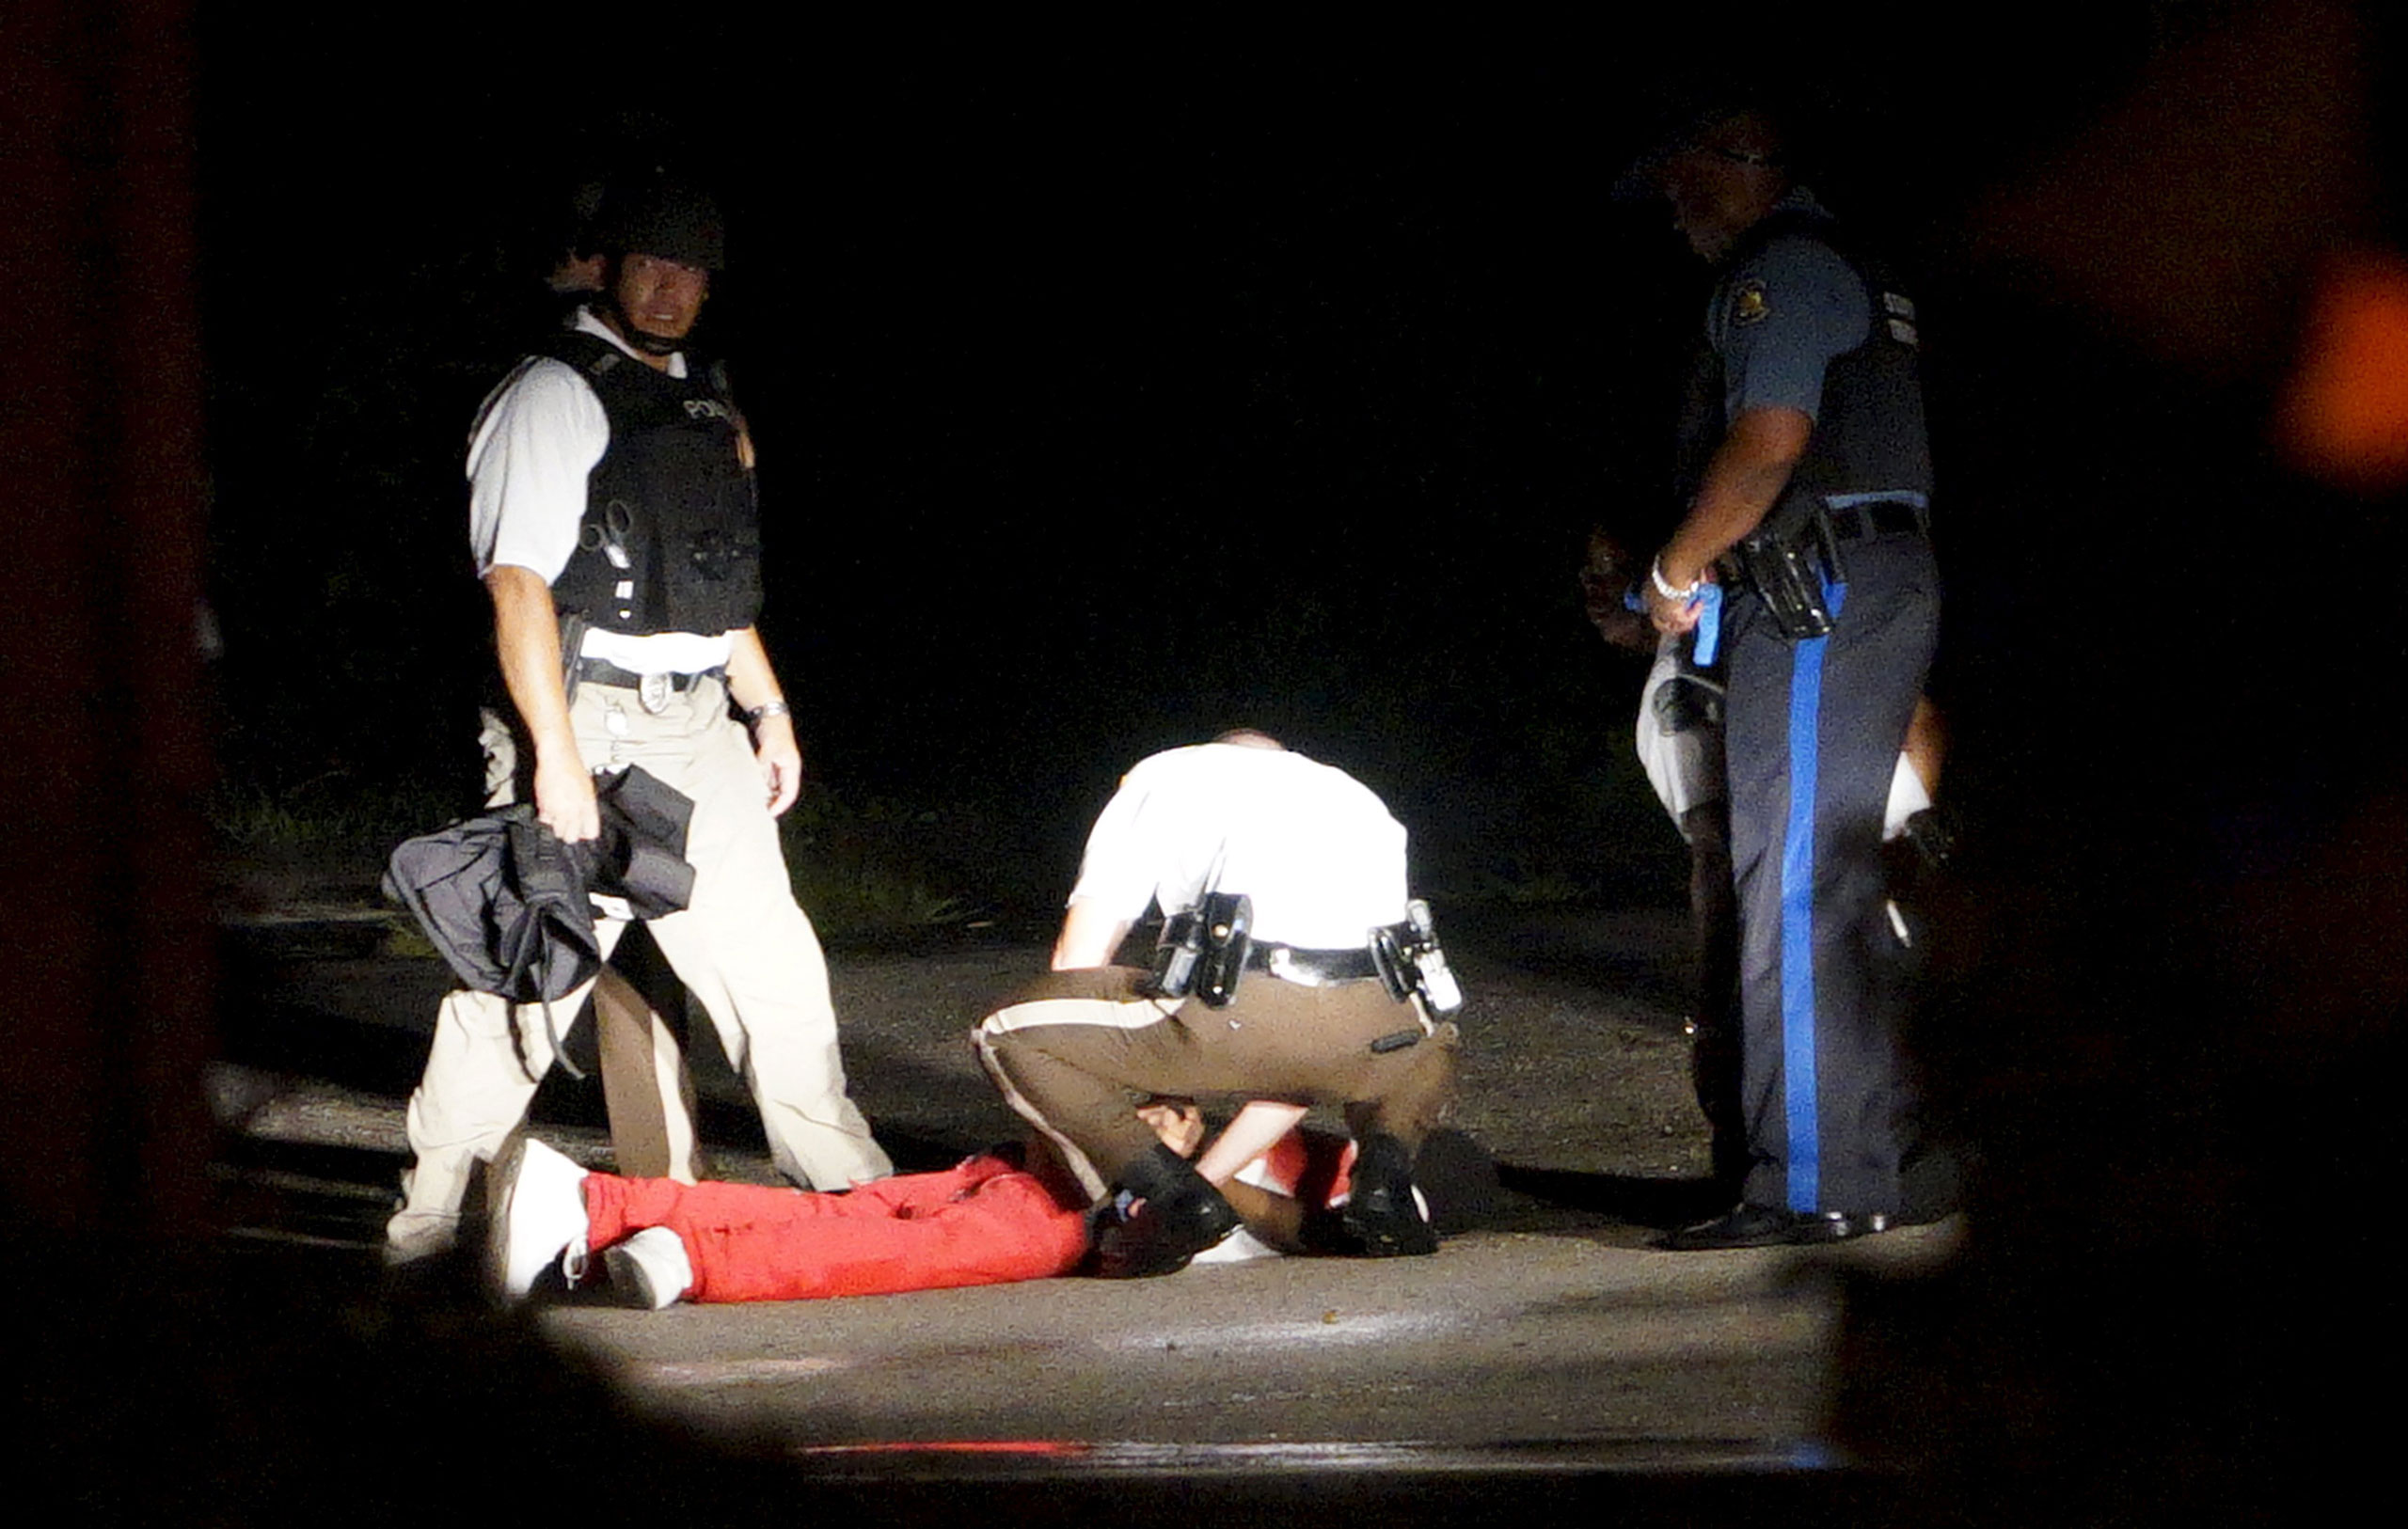 A black man lies badly wounded with blood on his shirt after a police officer involved shooting in Ferguson, Mo., on August 9, 2015.